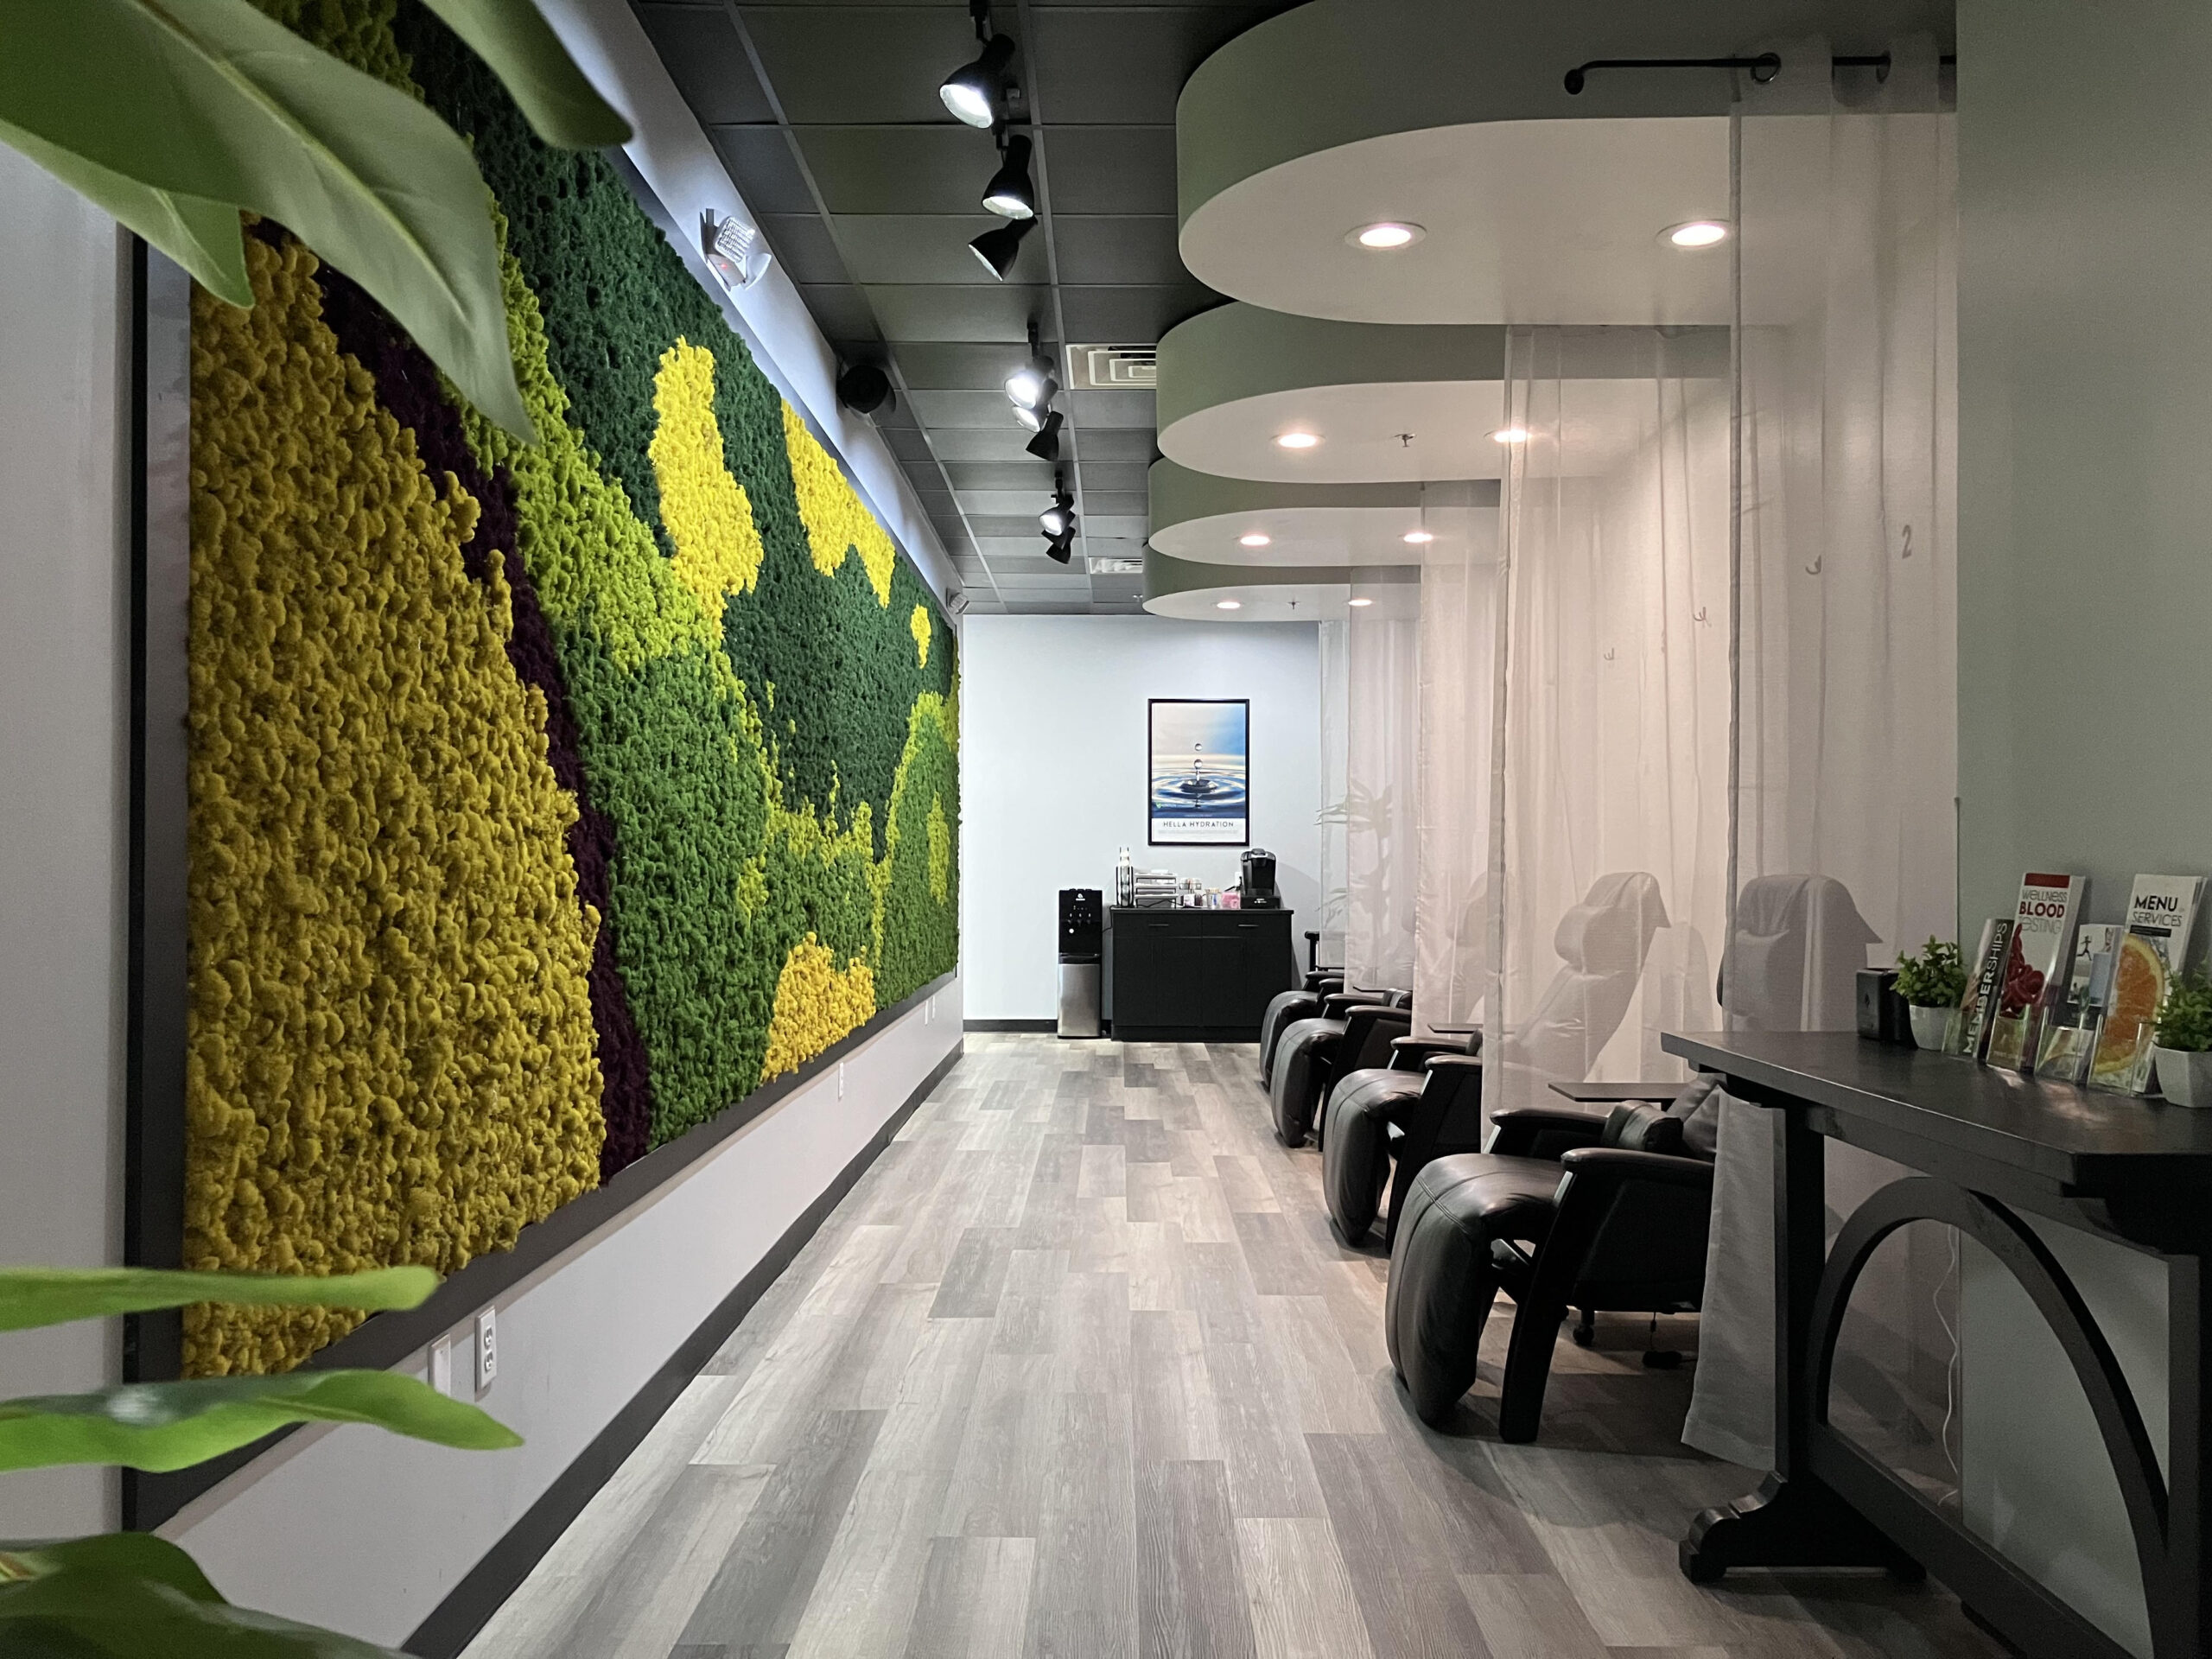 A salon offering blood testing services with a wall covered in plants and moss.